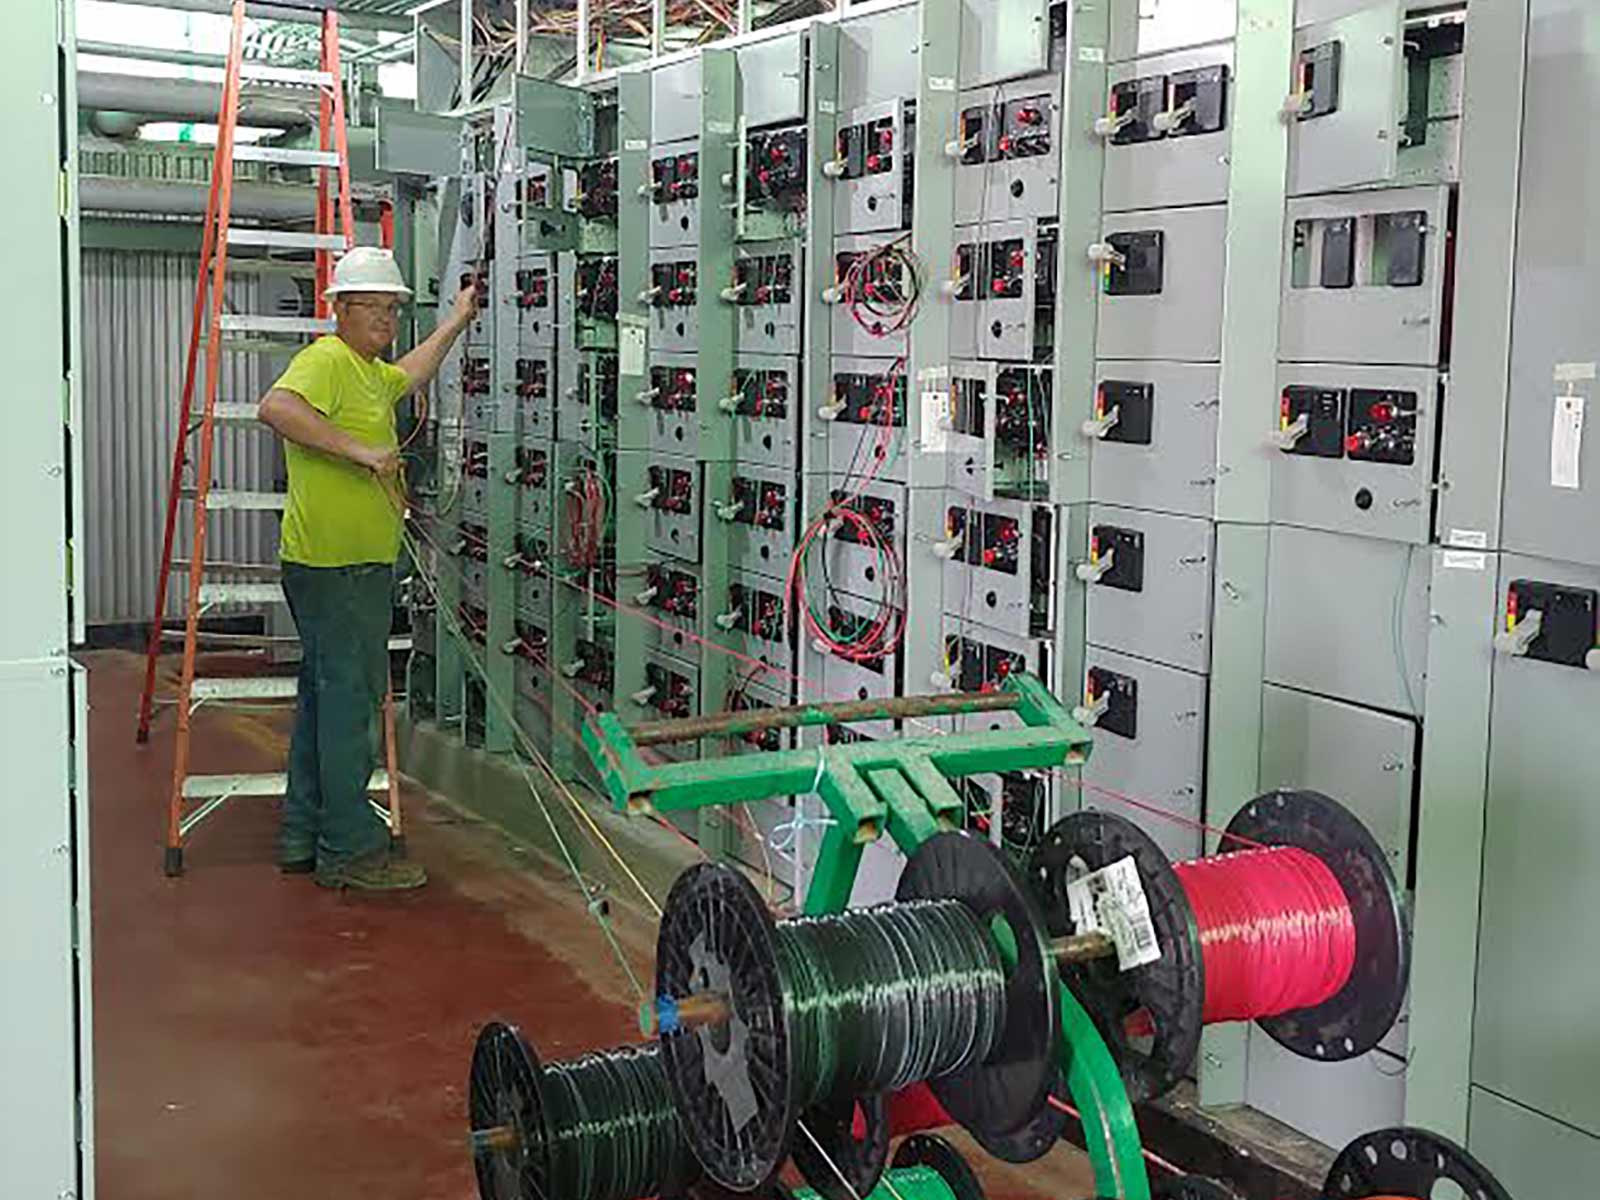 Pals Electric electrician pulling wire from a spool at an industrial manufacturing facility